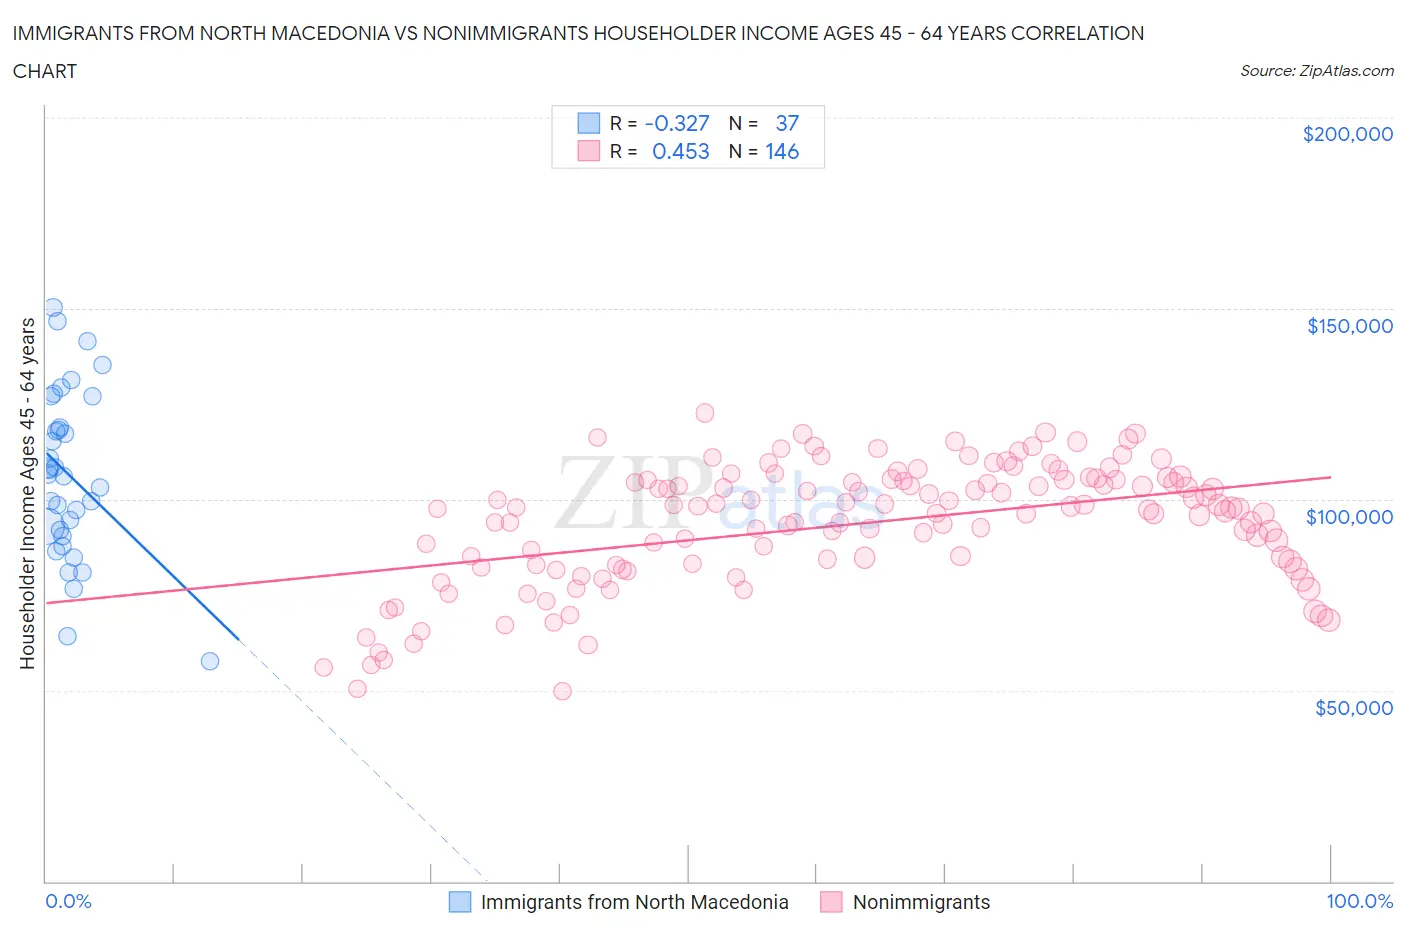 Immigrants from North Macedonia vs Nonimmigrants Householder Income Ages 45 - 64 years